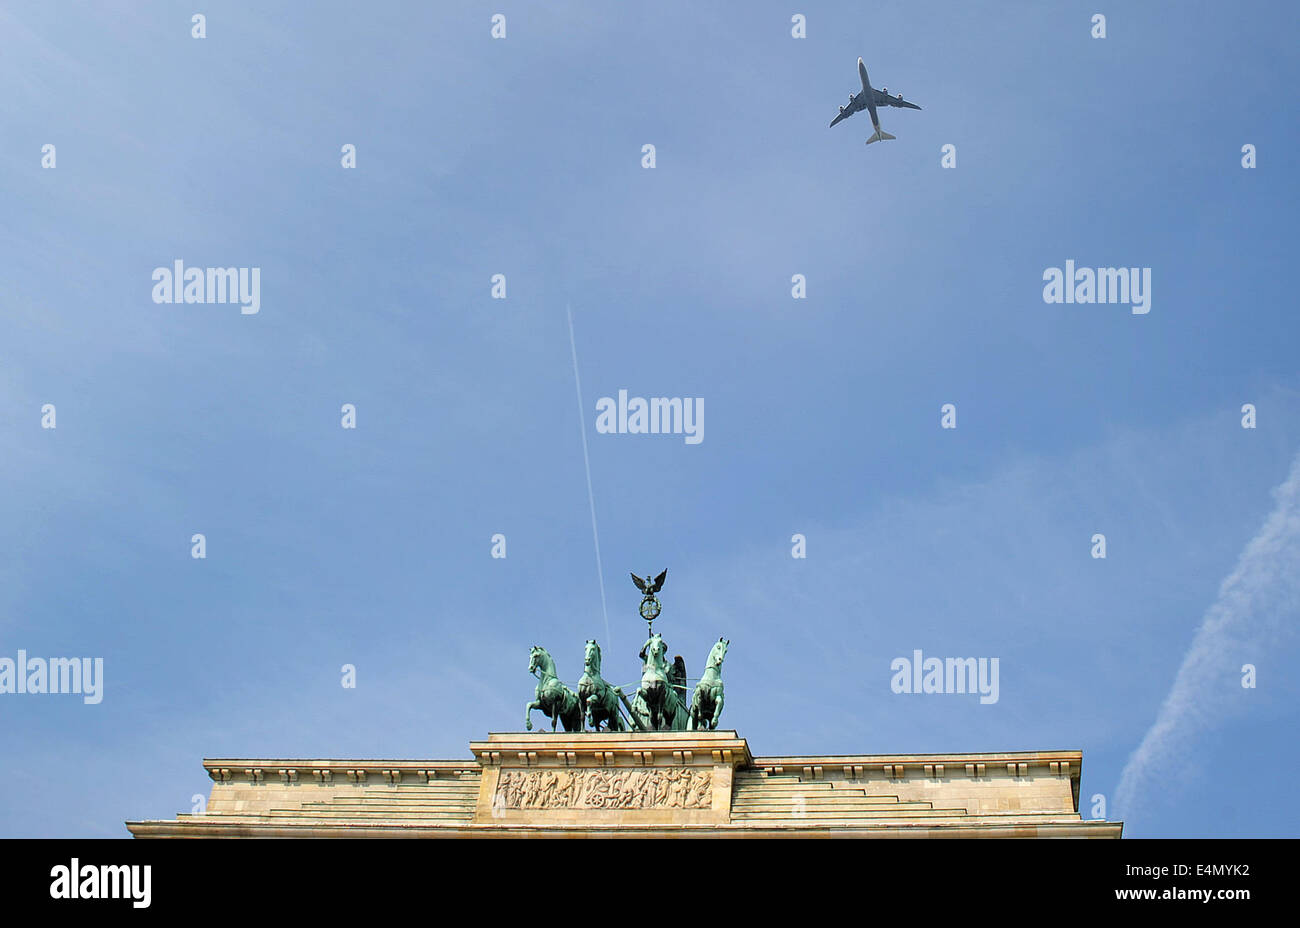 Berlin, Germany. 15th July, 2014. The airliner carrying the German national soccer team passes over Brandenburg Gate in Berlin, Germany, 15 July 2014. The German team on 13 July 2014 had won the Brazil 2014 FIFA Soccer World Cup final against Argentina by 1-0 to win the title for the fourth time after 1954, 1974 and 1990. Photo: Daniel Naupold/dpa/Alamy Live News Stock Photo